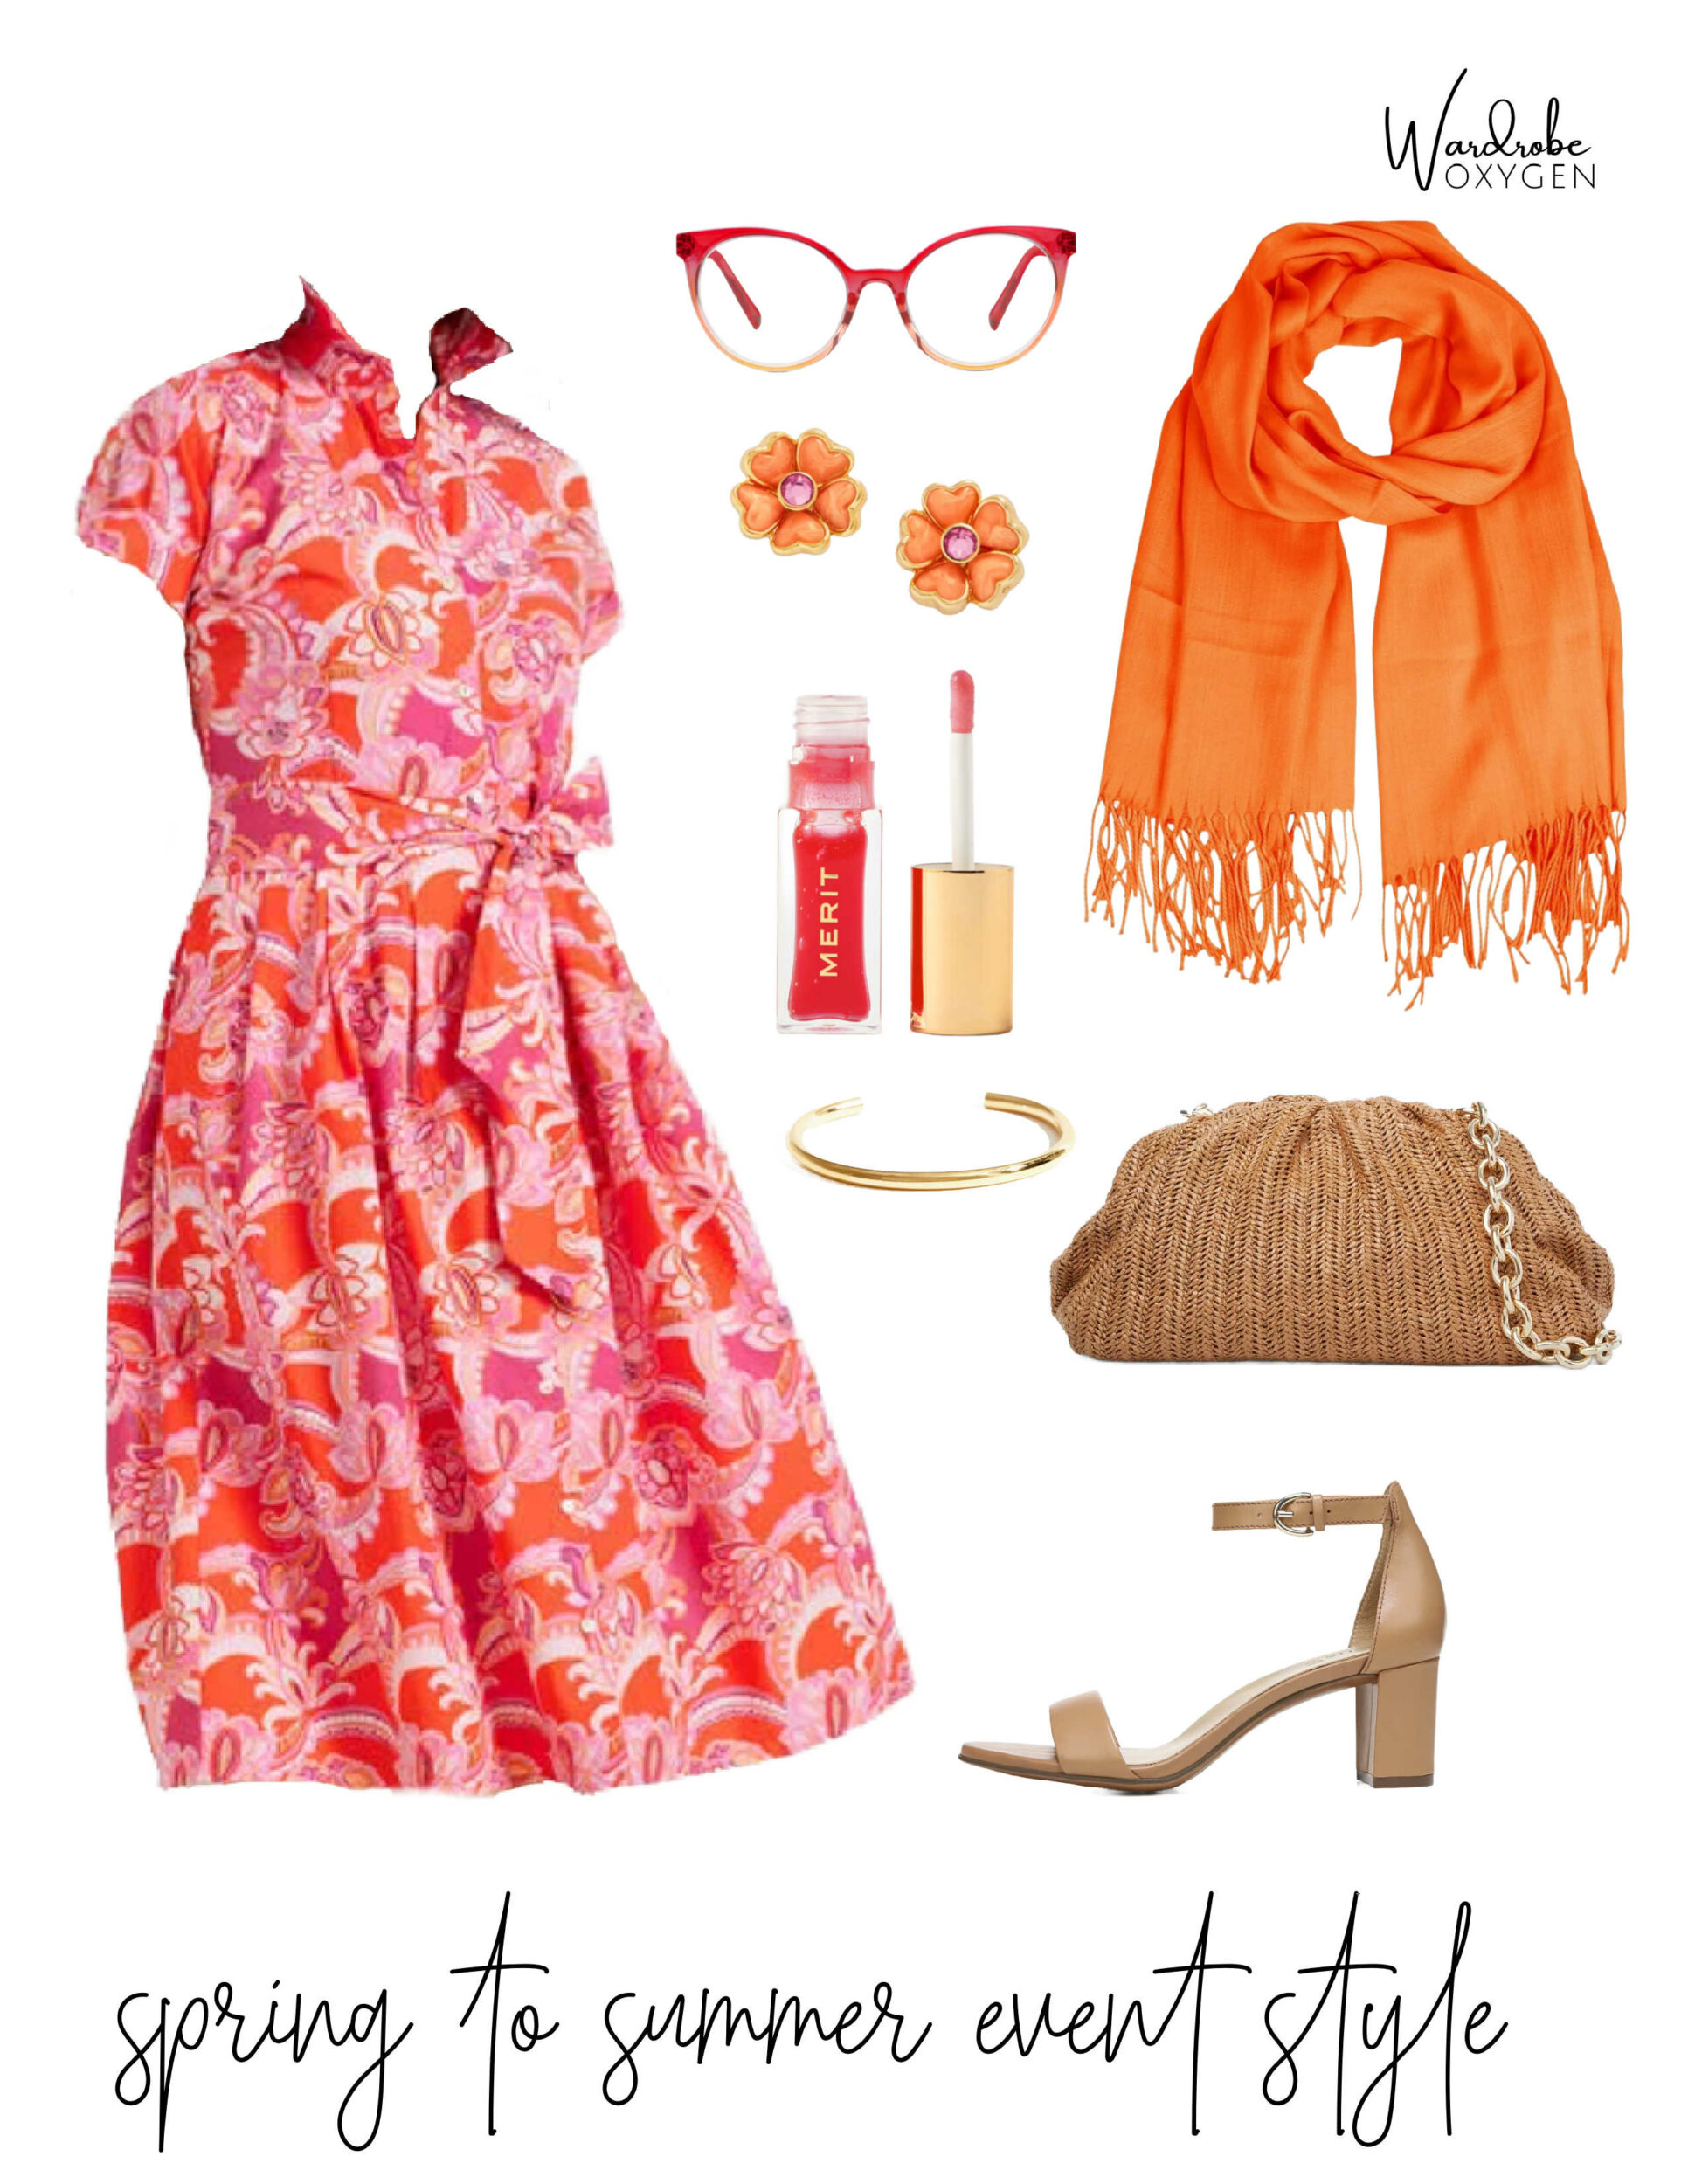 A collage featuring an orange and pink floral cotton shirtdress from Talbots with a raffia clutch, heeled sandals, and orange accessories for a summer event for women over 40